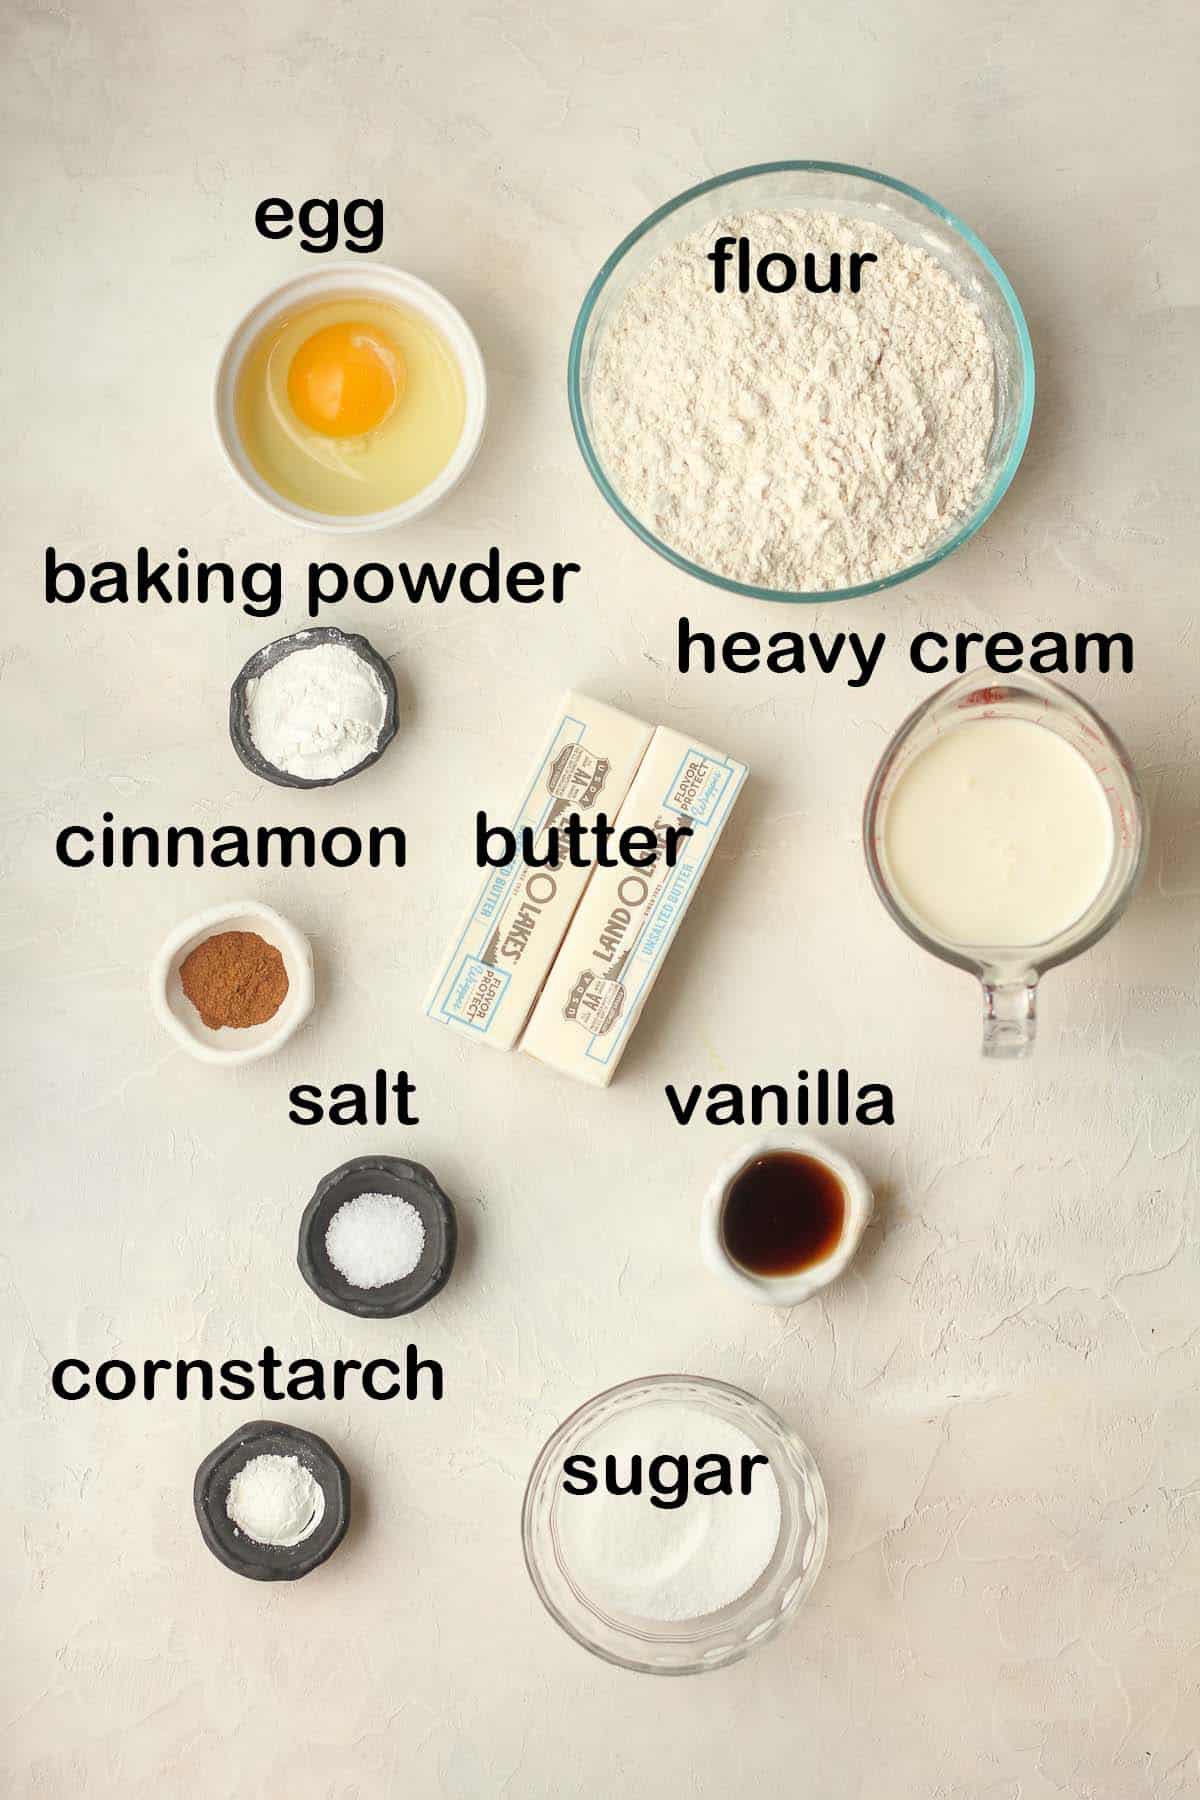 Labeled ingredients for snickerdoodle scones.